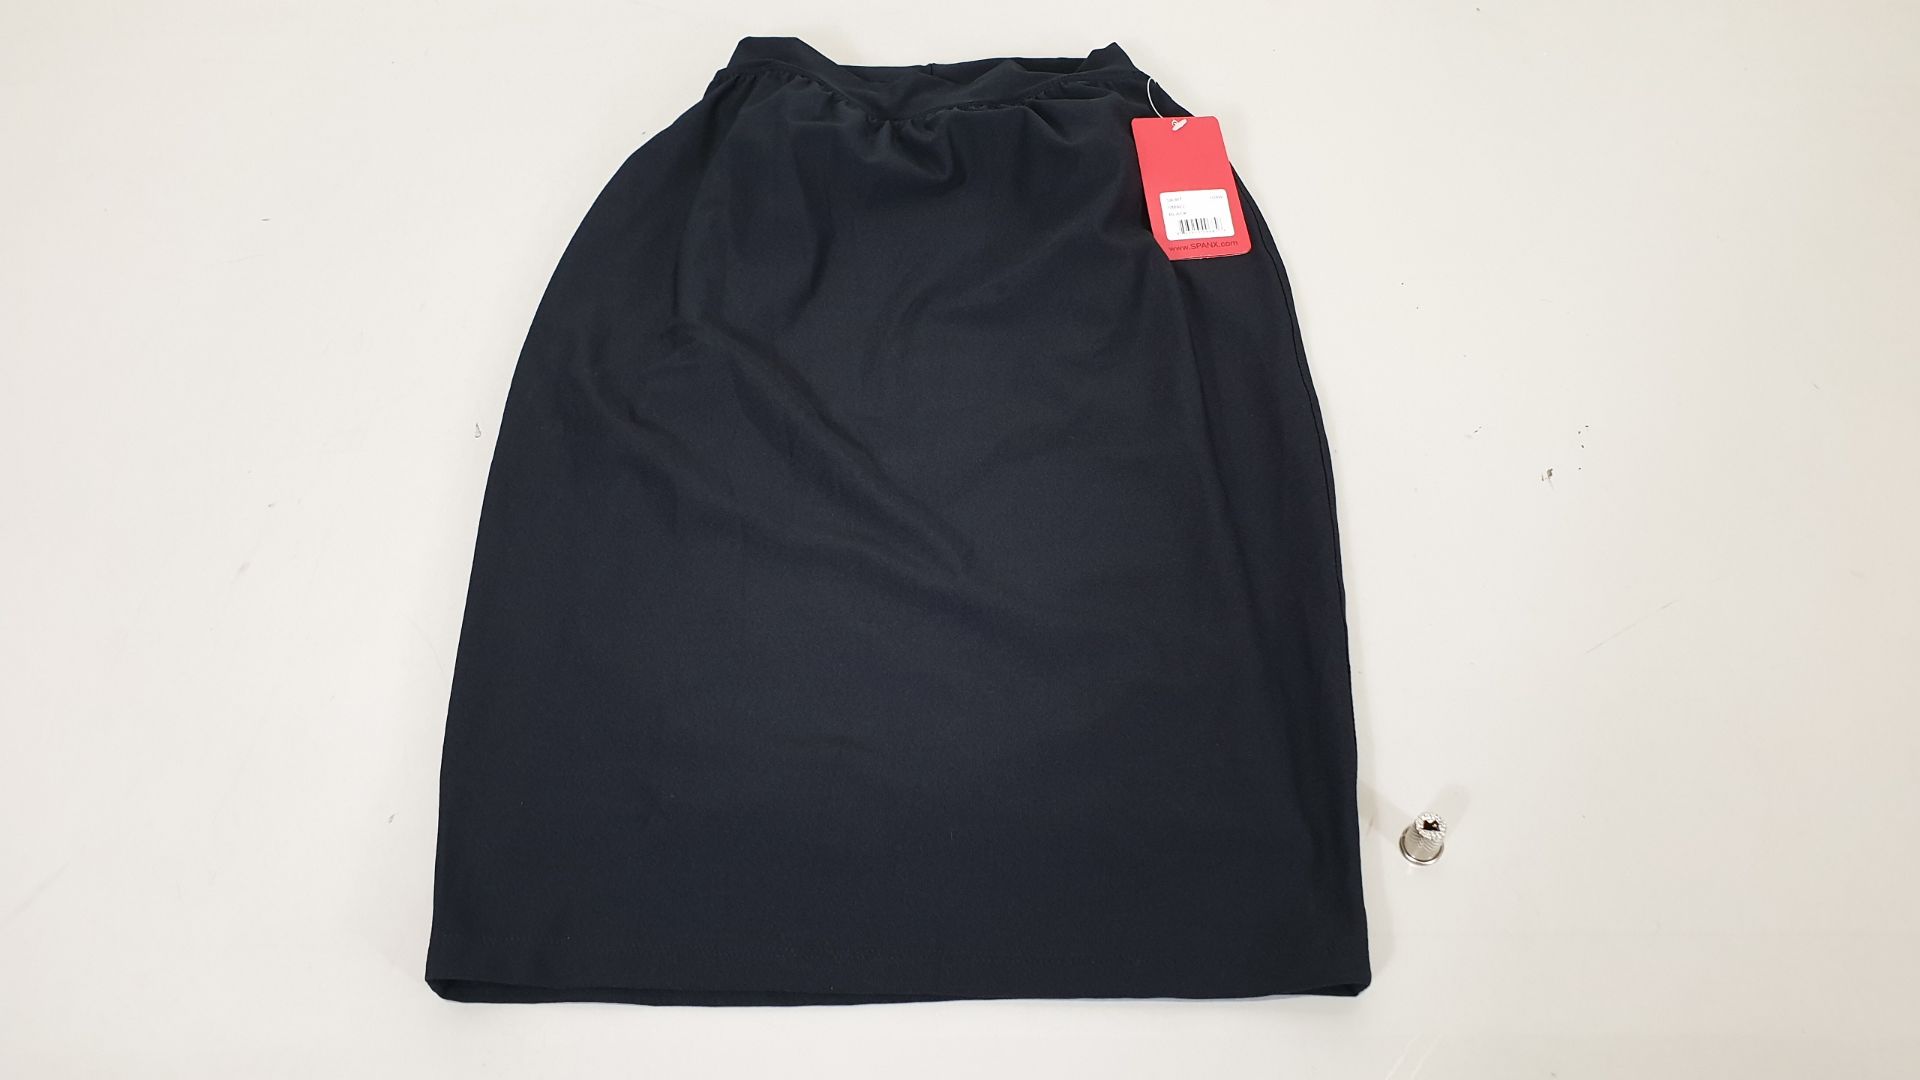 11 X BRAND NEW SPANX BOD-A-BING! BLACK SKIRT WITH SECRET SLIMMING LINER IN VARIOUS SIZES